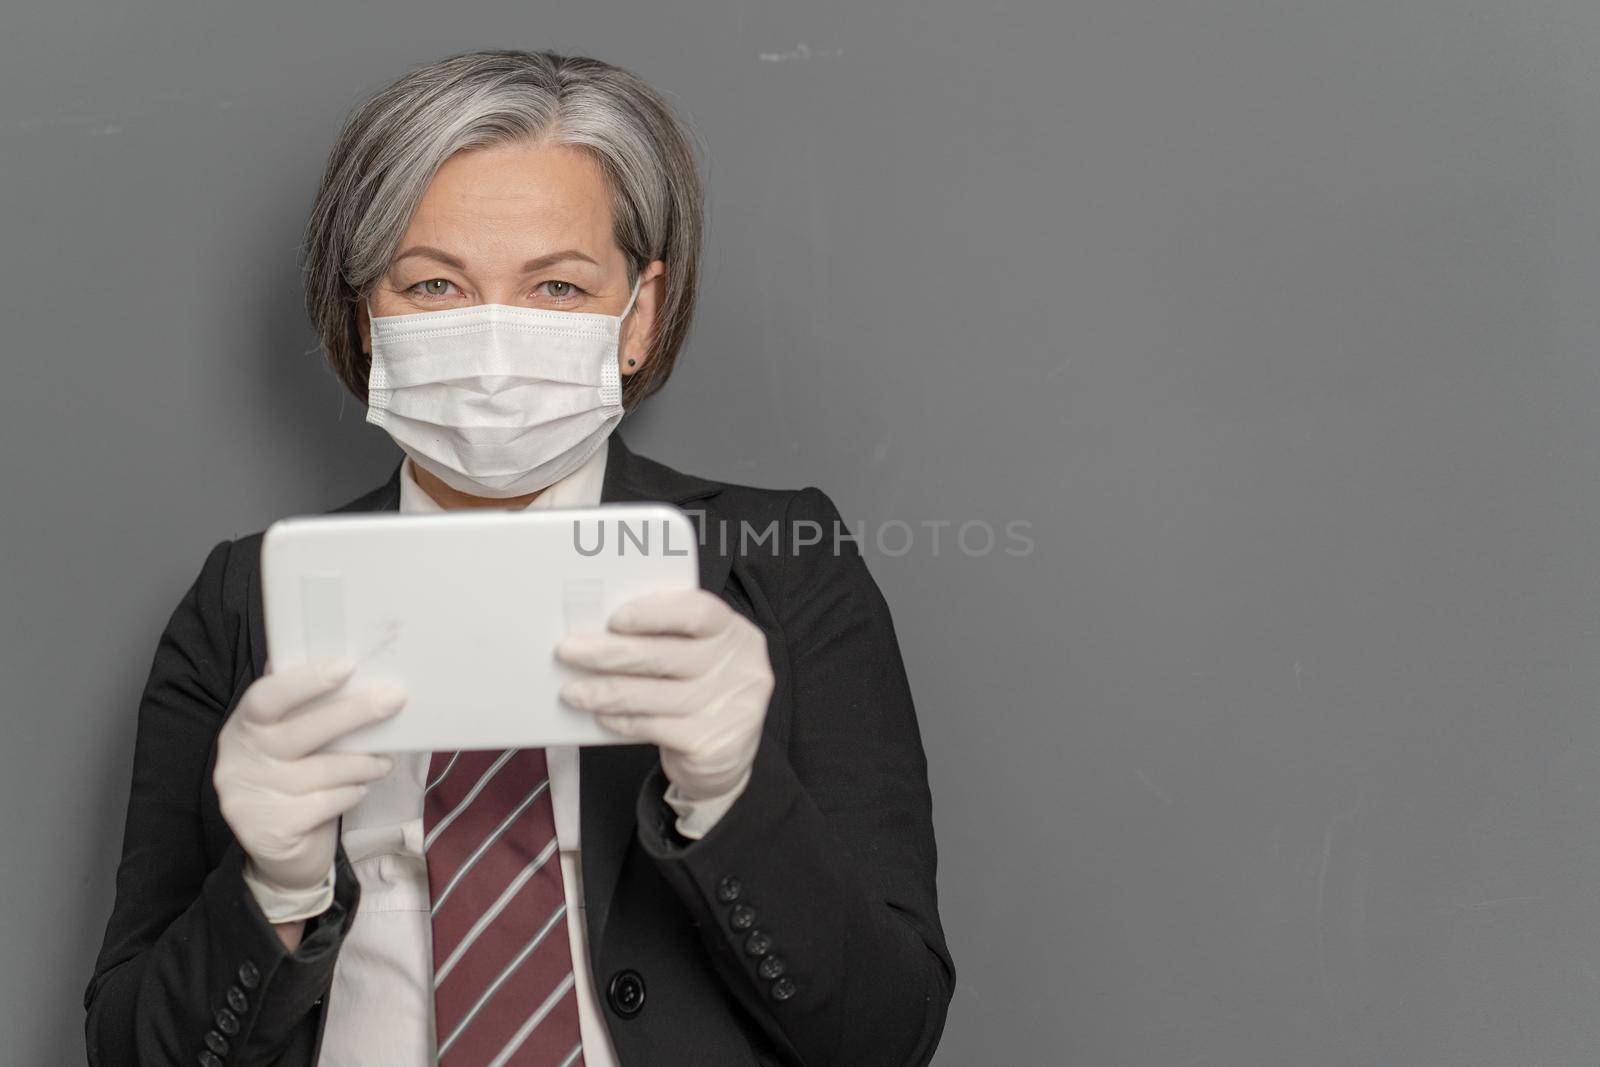 Gray-haired businesswoman works notepad. Caucasian lady holds tablet looking at camera on gray background with textspace on right. Focus on female face in protective mask. Virus outbreak concept.